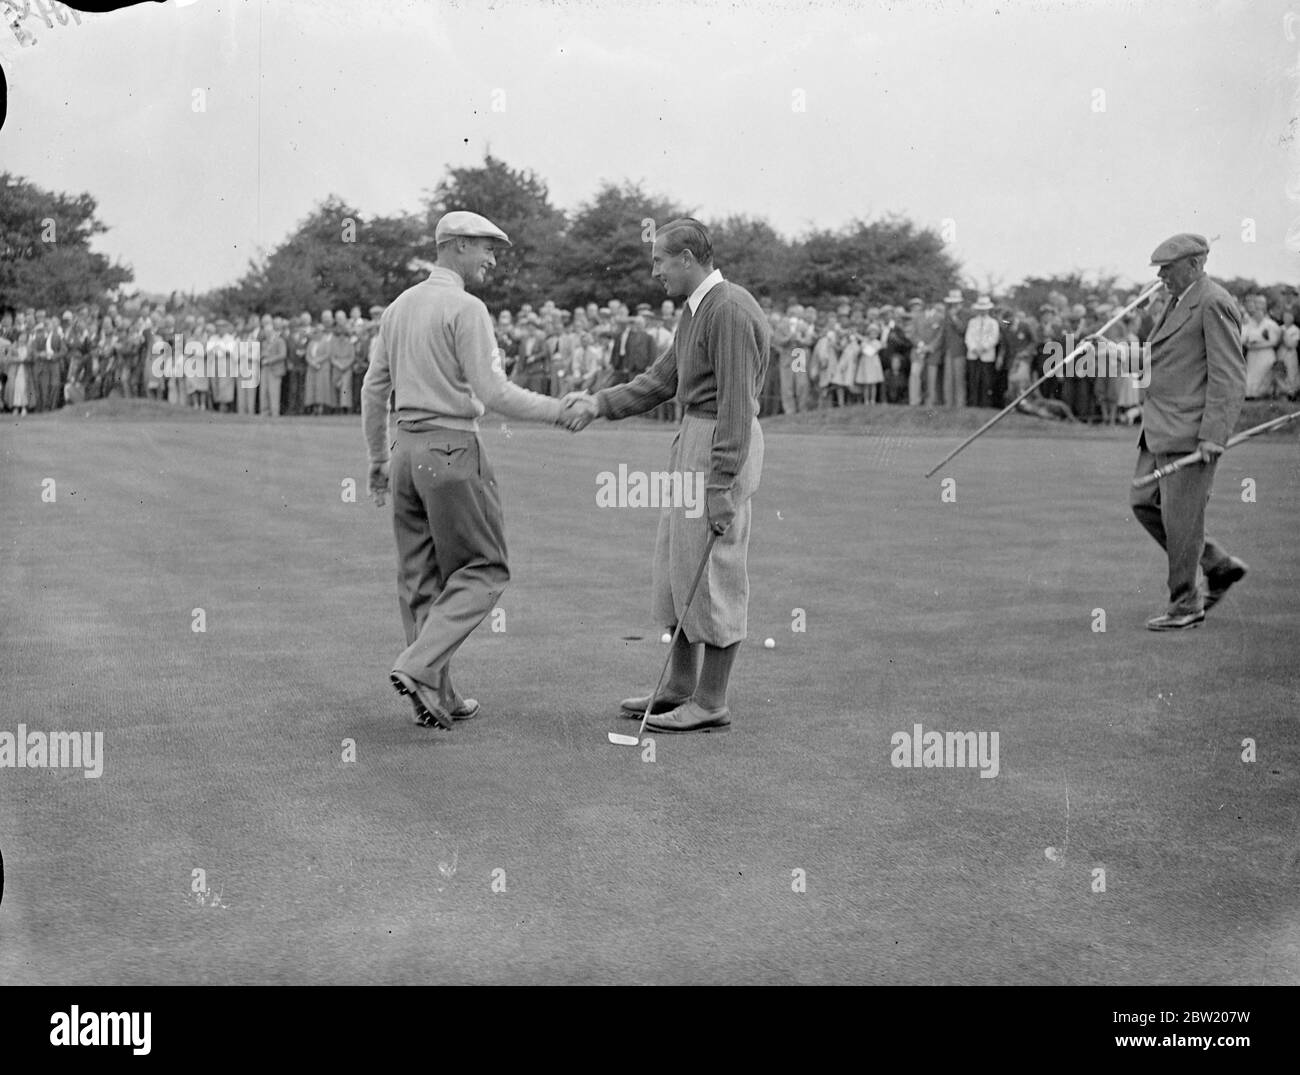 Henry Cotton, the new British Open champion, defeated Densmore Shute, the American Ryder Cup player, 6 and 5 in the 72 holes, Â£500 golf match at Walton Heath. Henry Cotton (right) congratulated by Densmore Shute at the 30th where Cotton won the match. 13 July 1937 Stock Photo